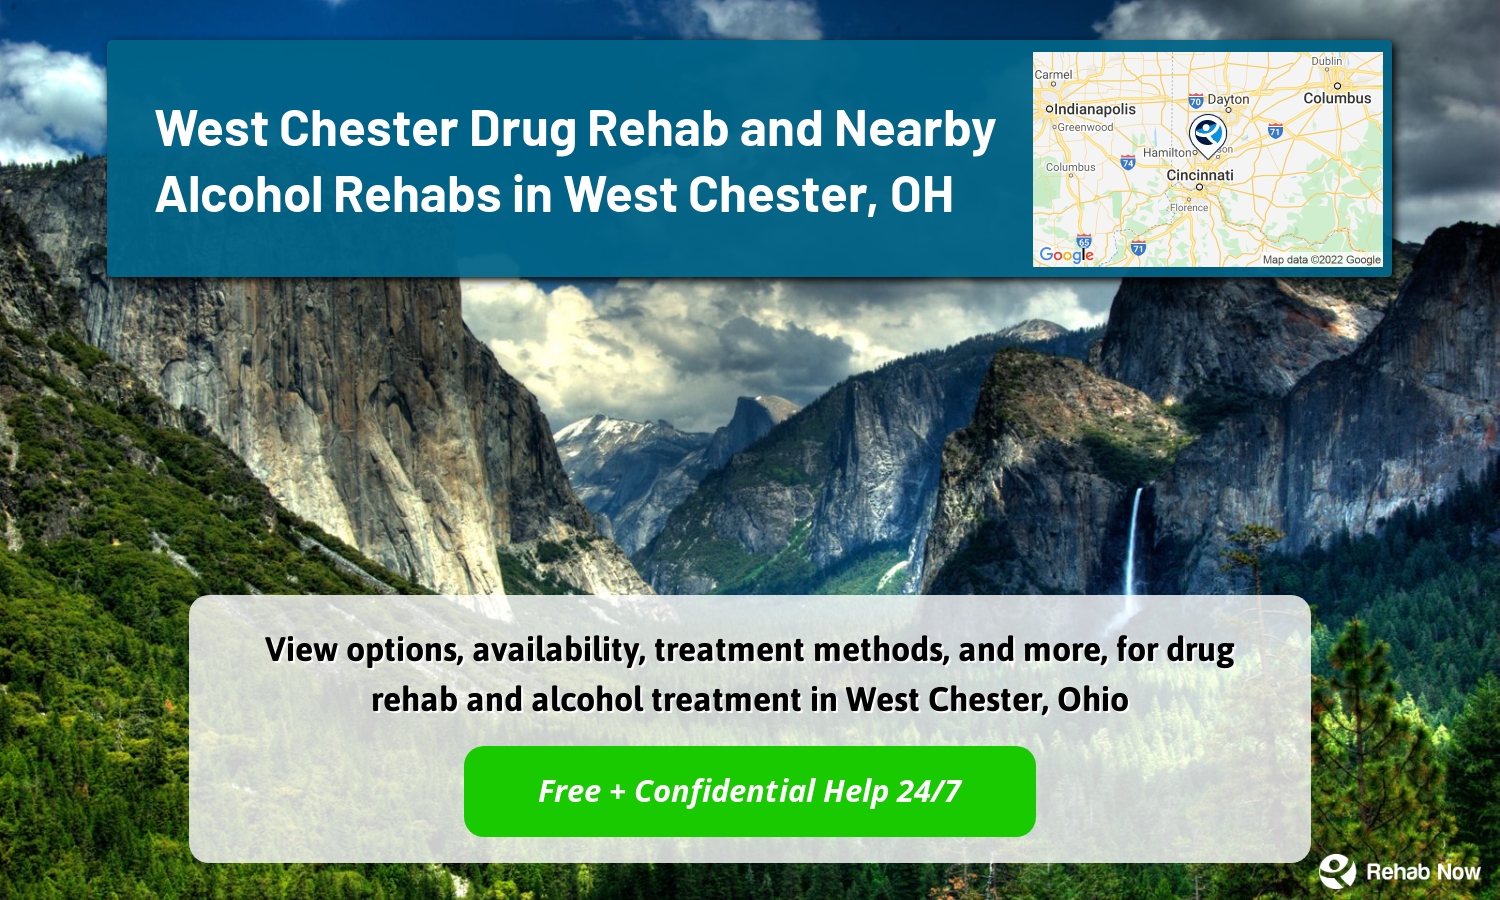 View options, availability, treatment methods, and more, for drug rehab and alcohol treatment in West Chester, Ohio